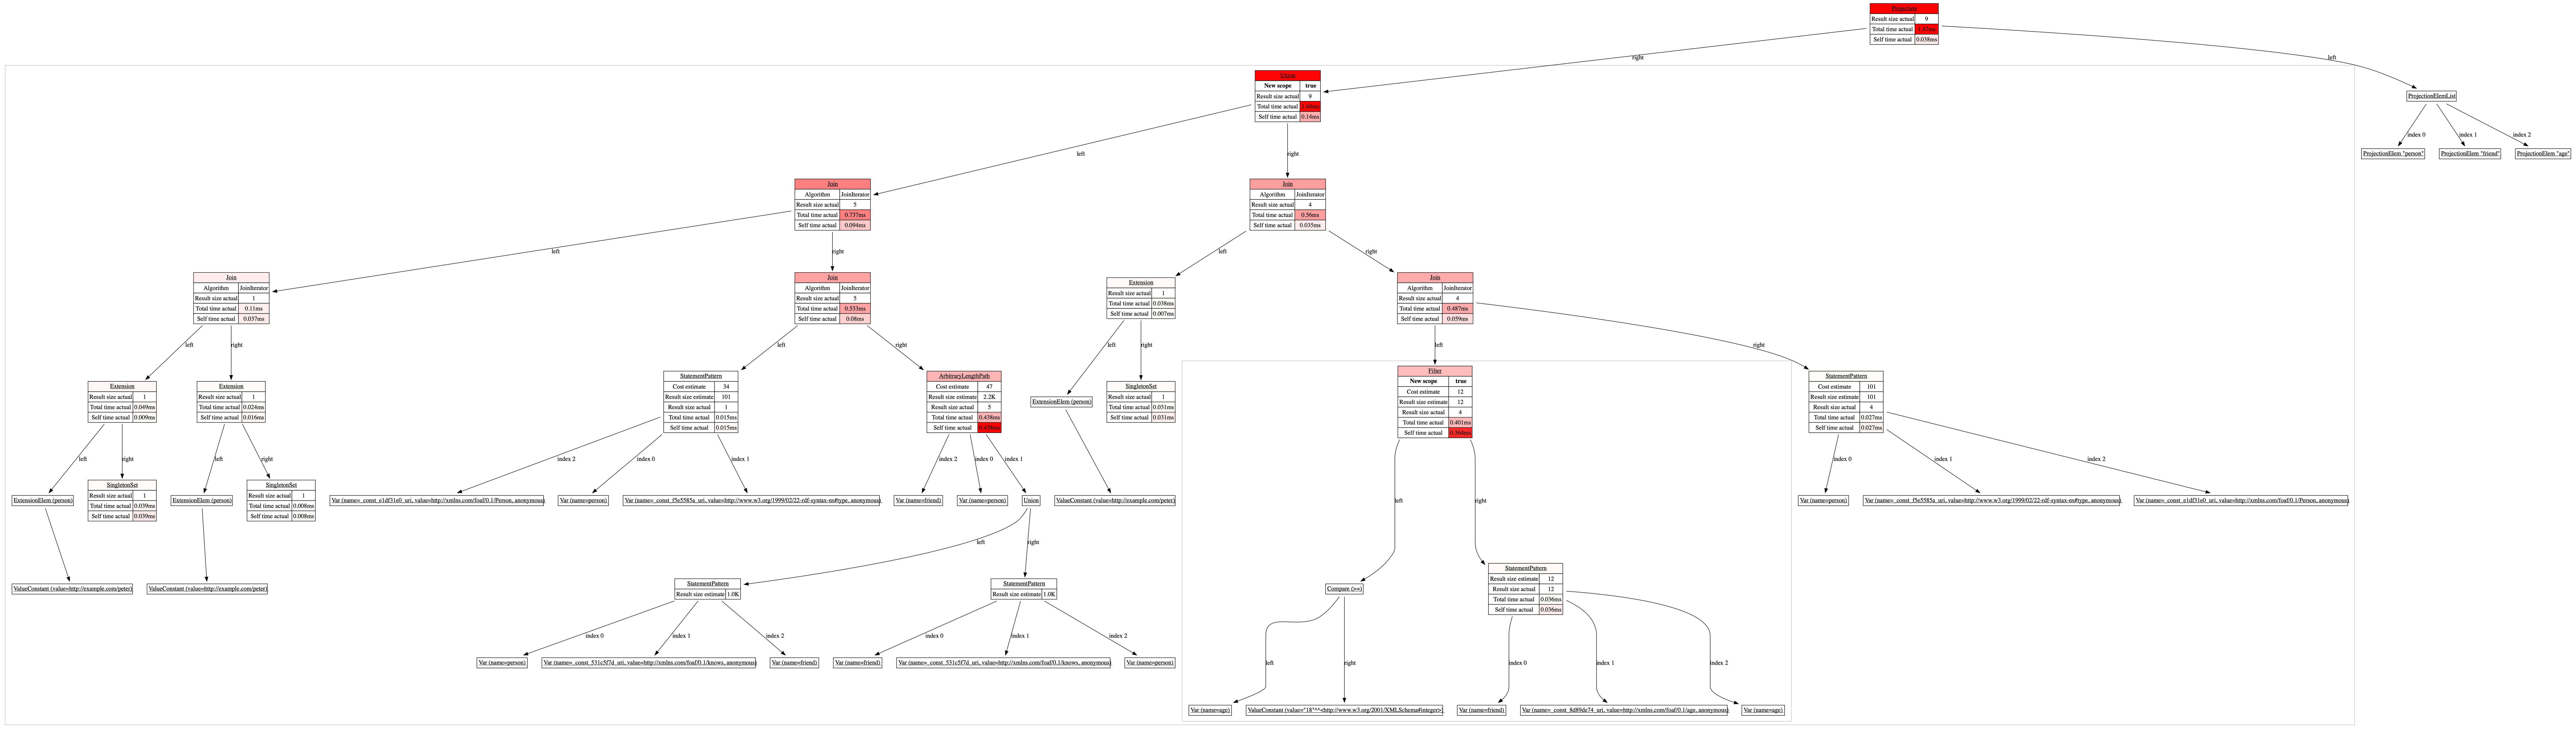 Picture of query explanation visualized with Graphviz.